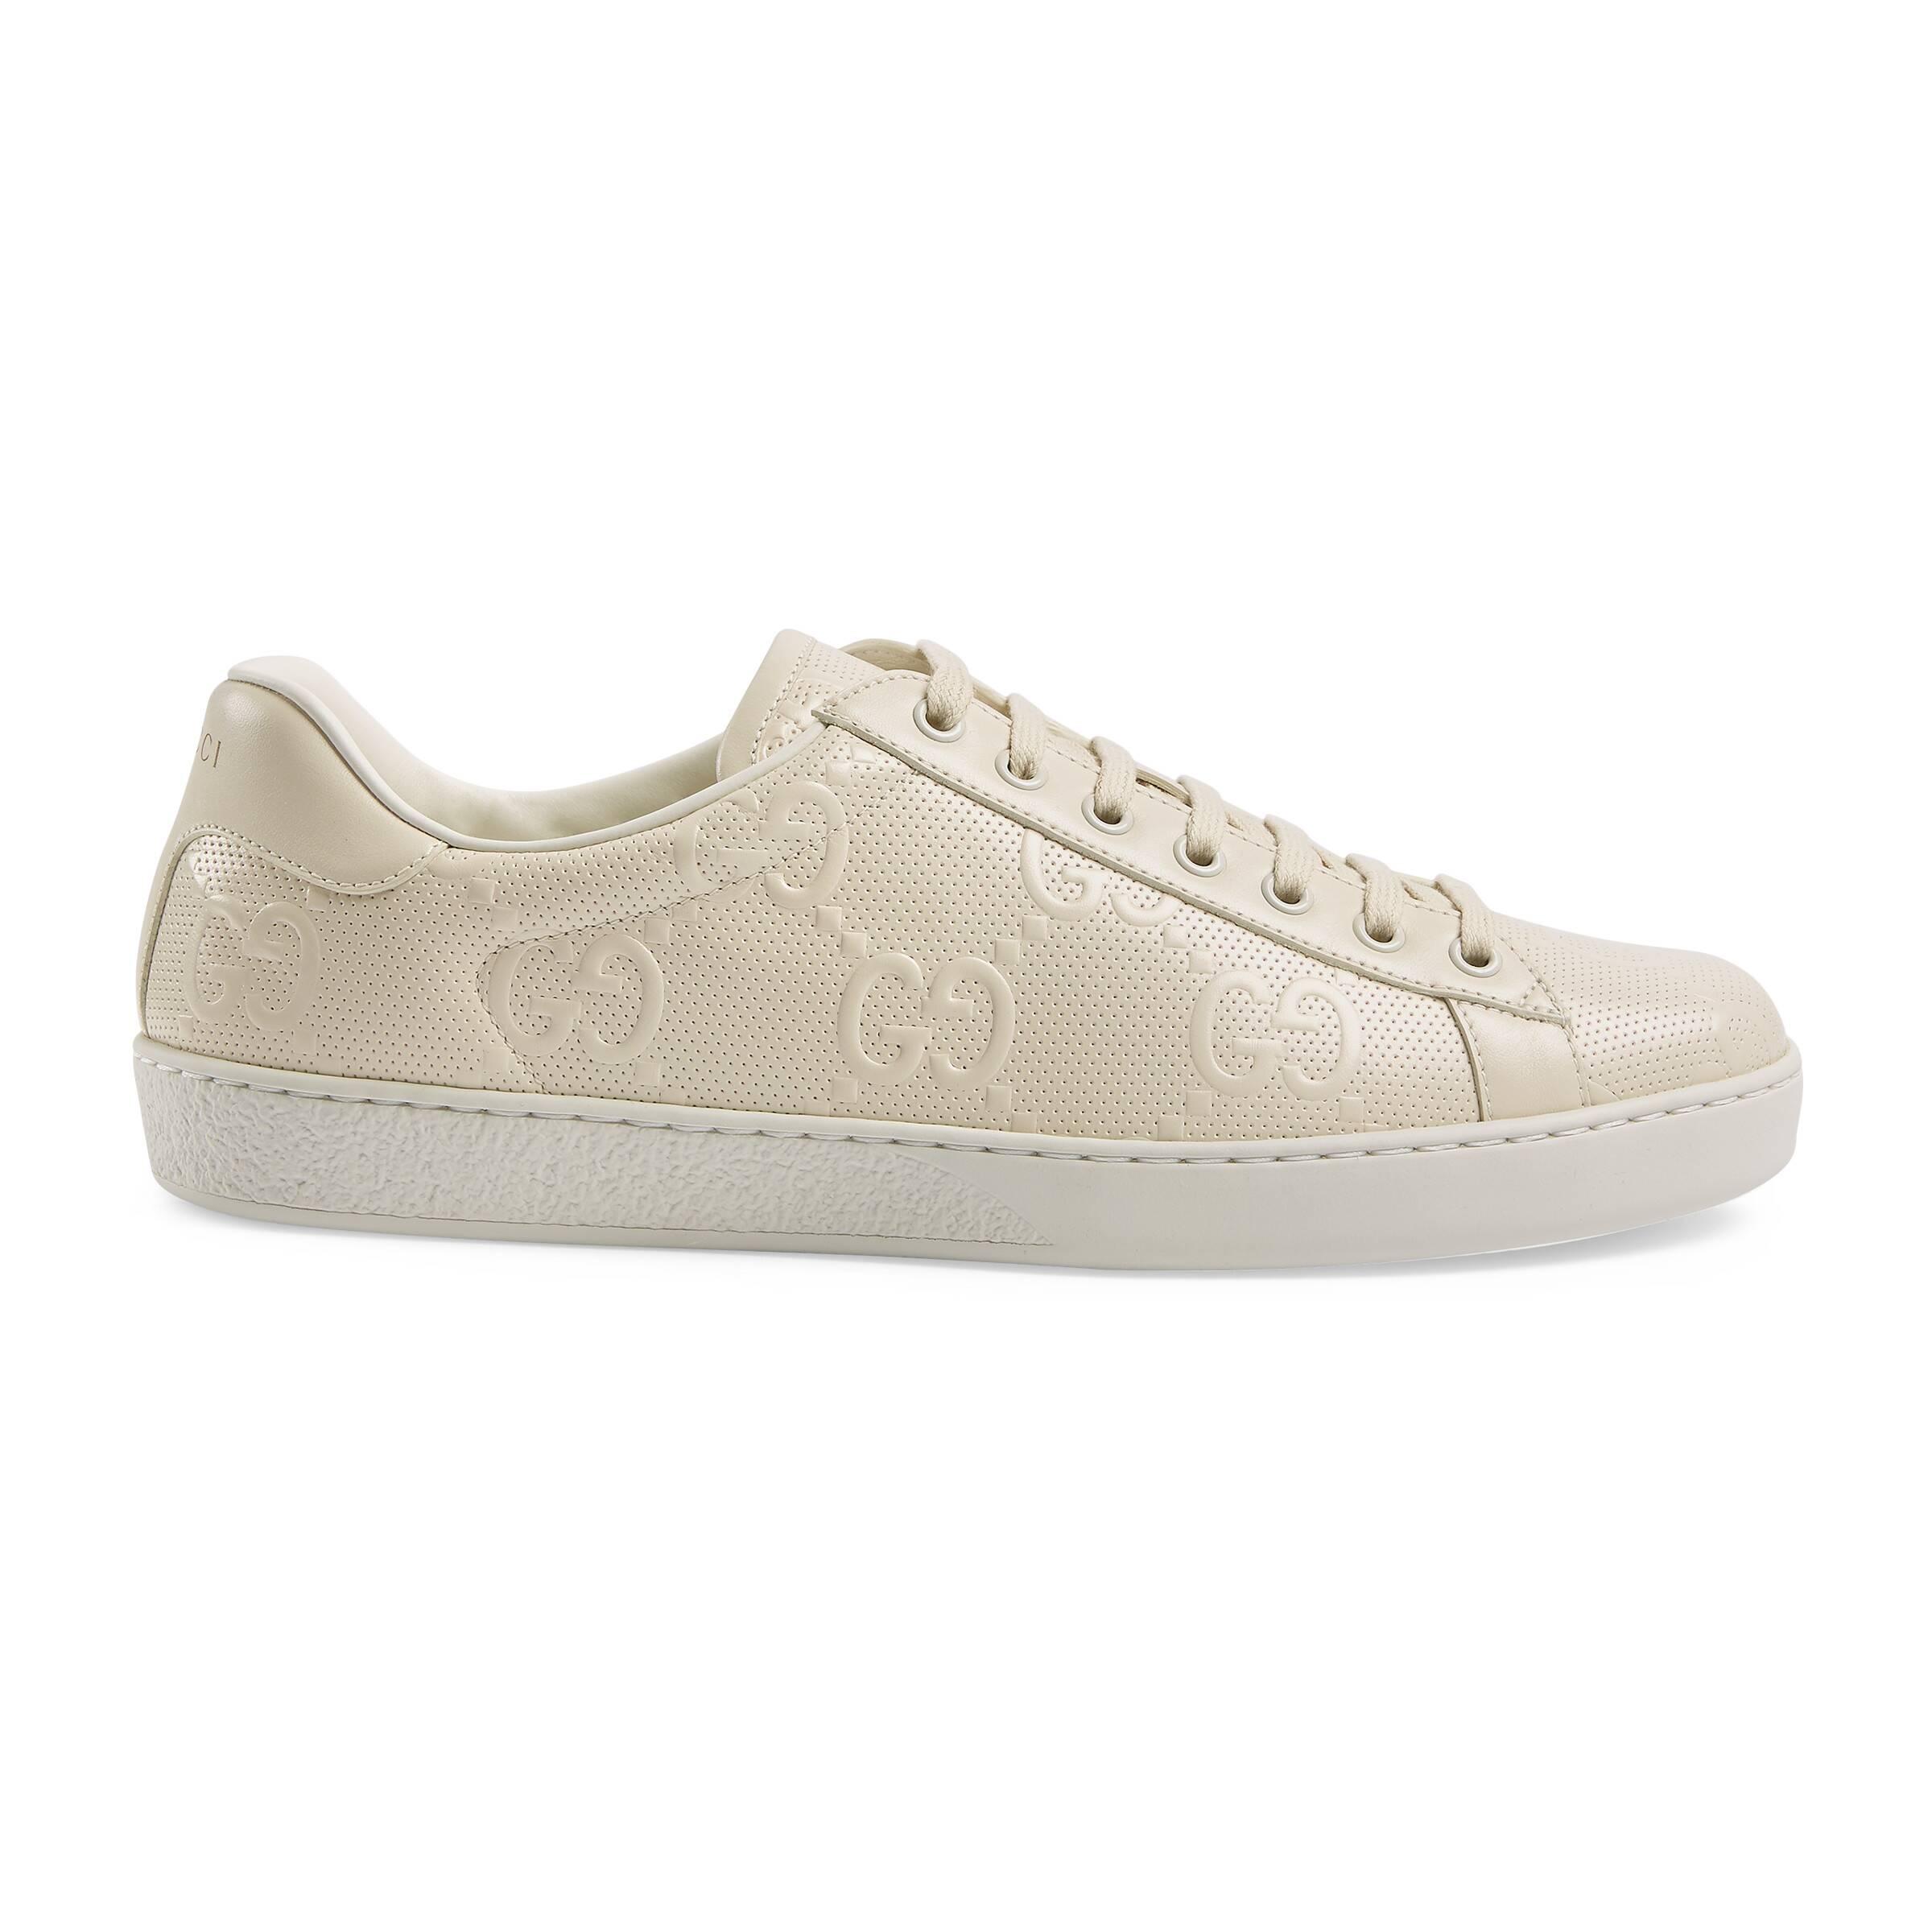 Gucci Leather Ace GG Embossed Sneaker in White for Men - Lyst